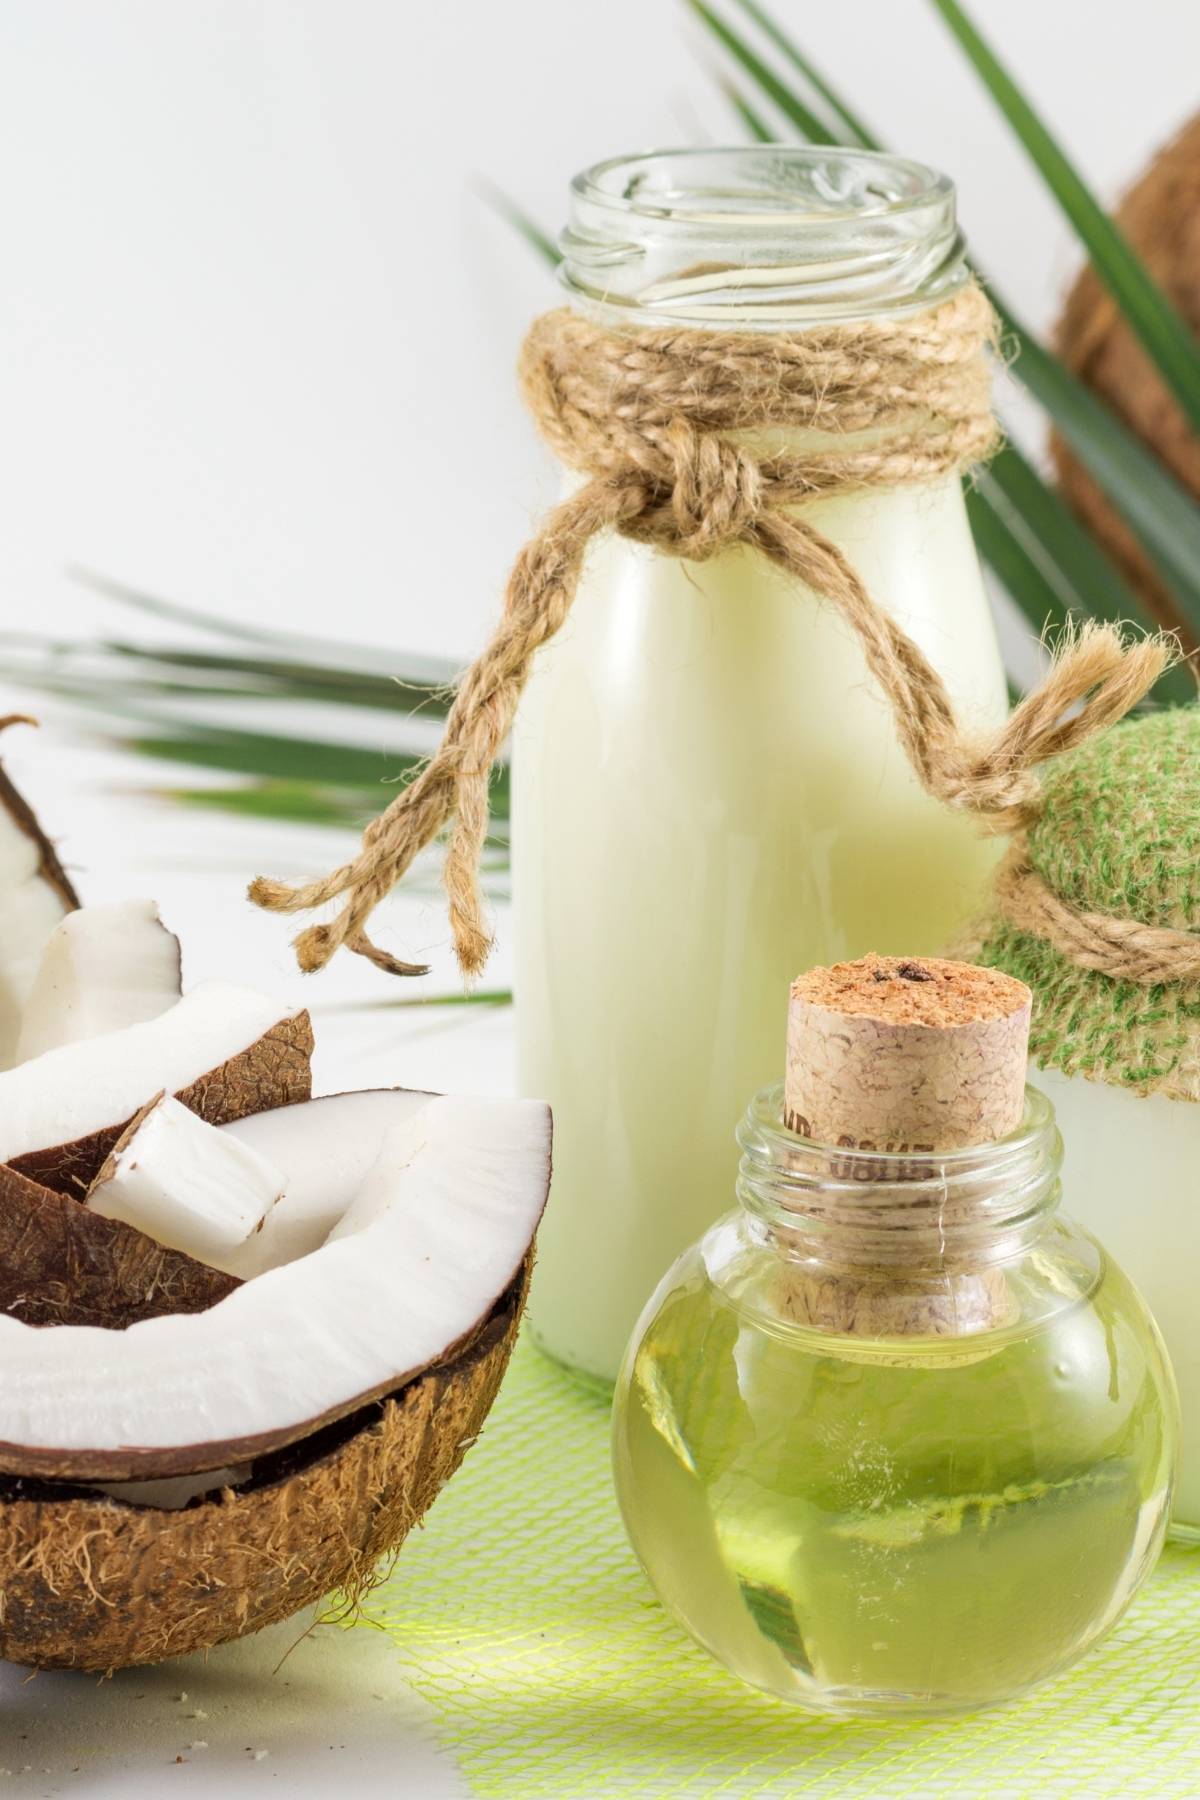 Does coconut oil ever go bad? What are the key signs of bad coconut oil? How to store it properly and how long does it last? Keep reading and you’ll find everything that you need to know.